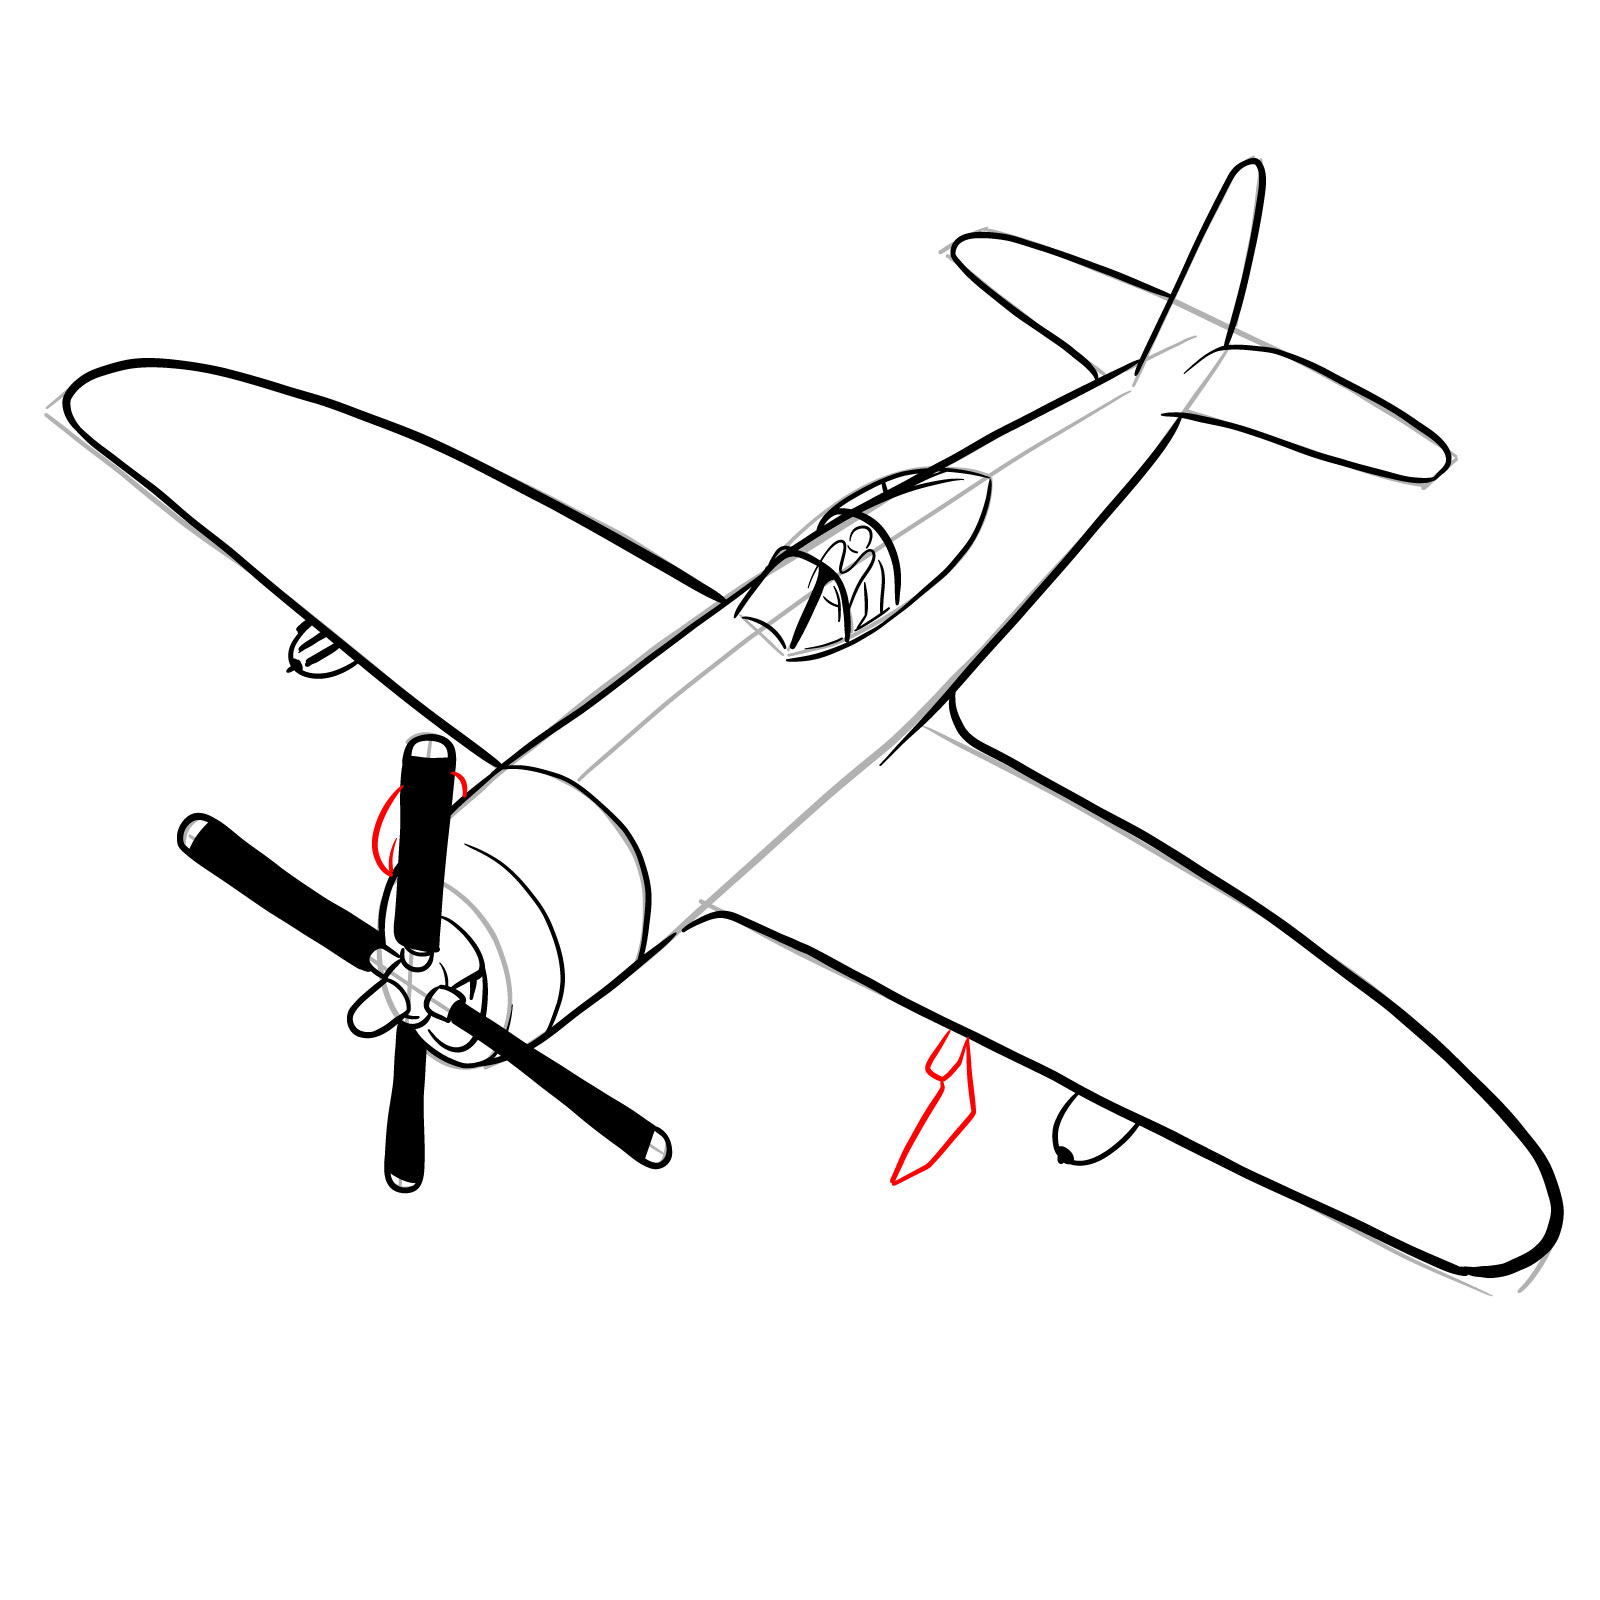 How to draw the Republic P-47 Thunderbolt - step 23